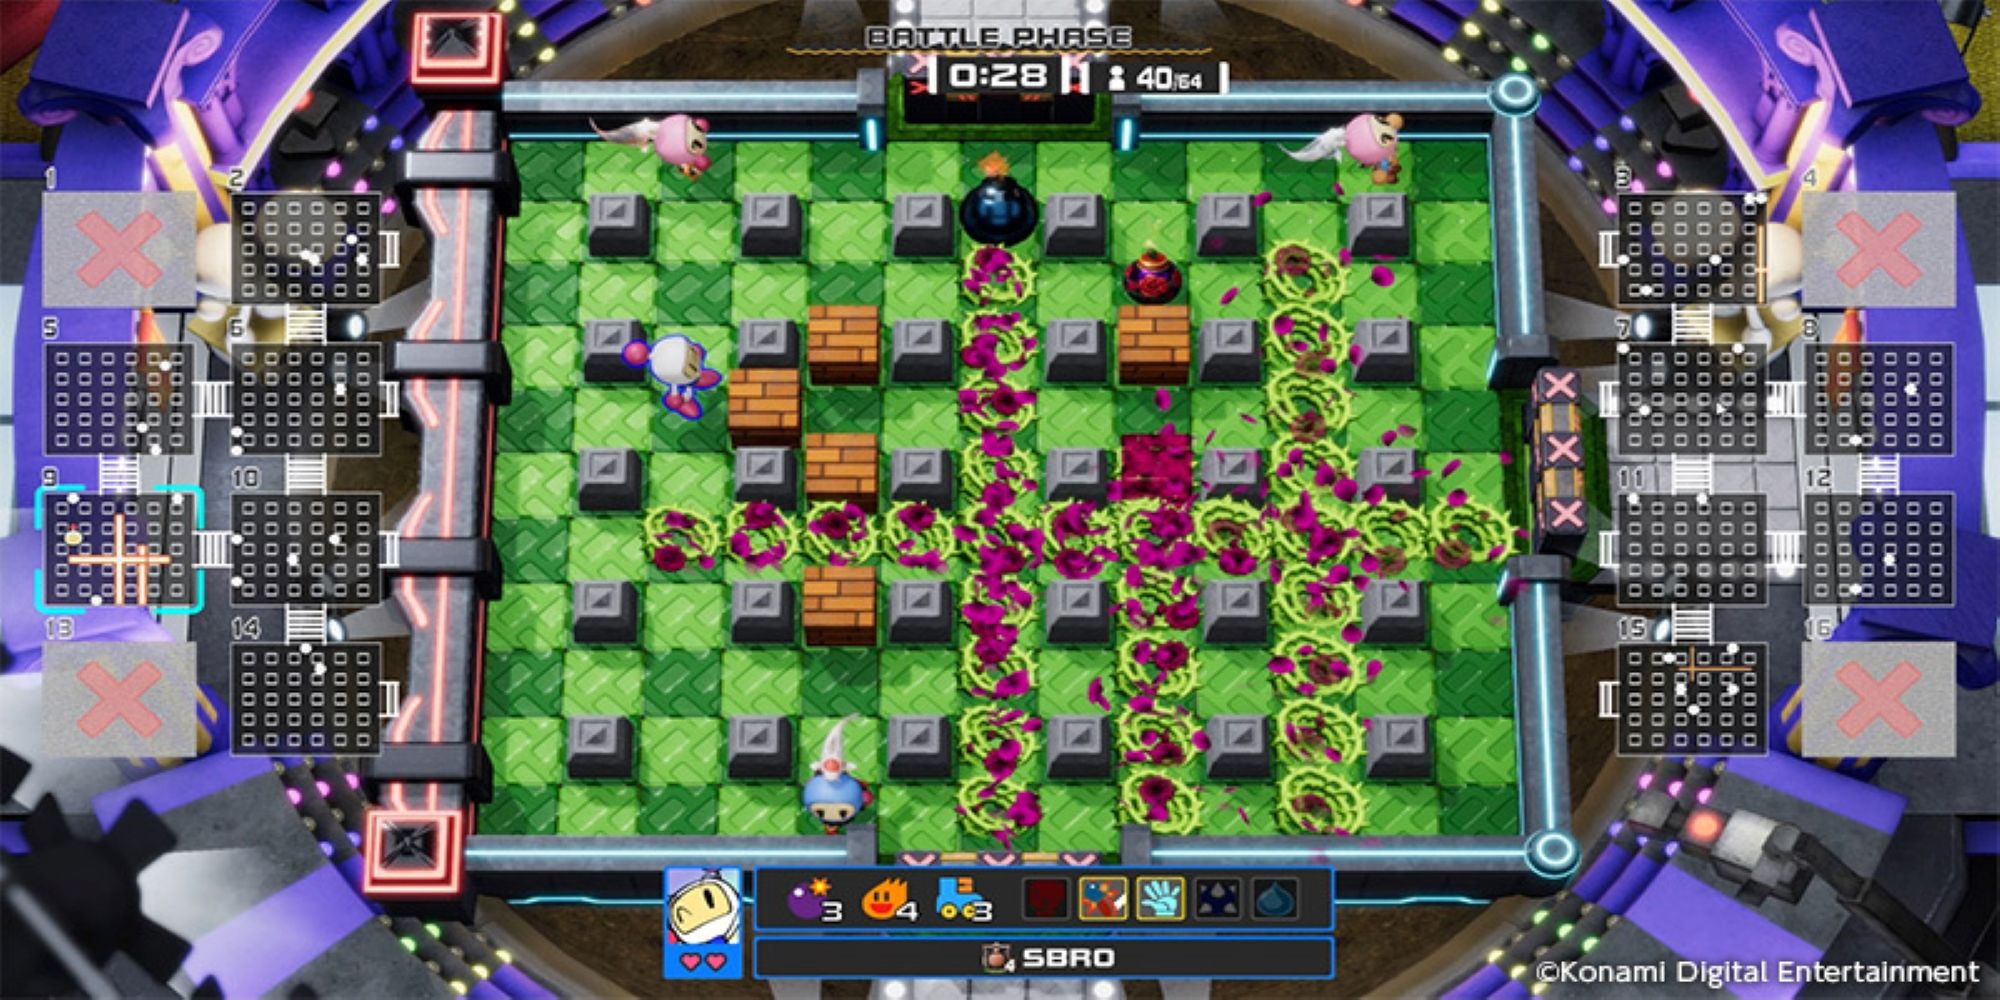 Bombermen compete in a 64-player battle royale in Super Bomberman R Online.